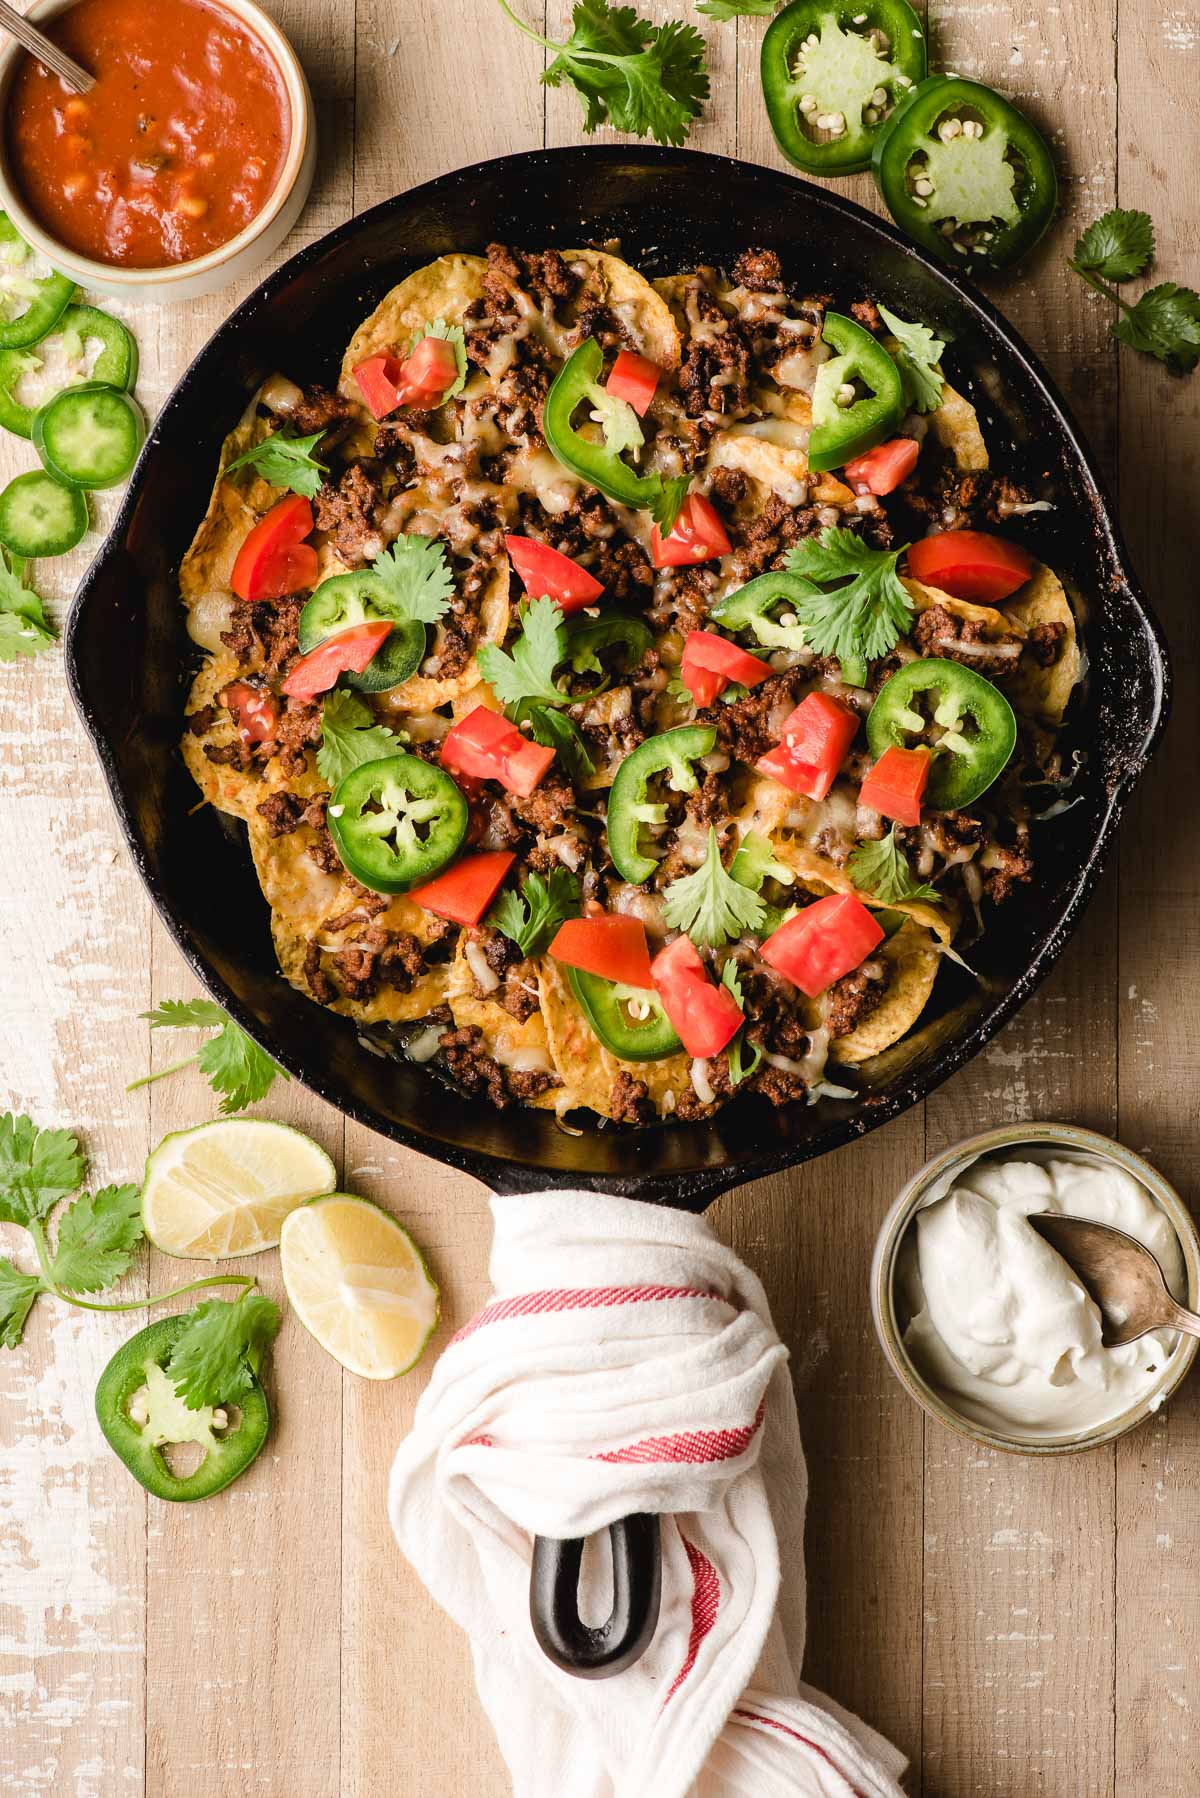 Cast Iron Skillet Nachos with Ground Beef, jalapenos, tomatoes, cilantro, and sour cream and salsa on the side.